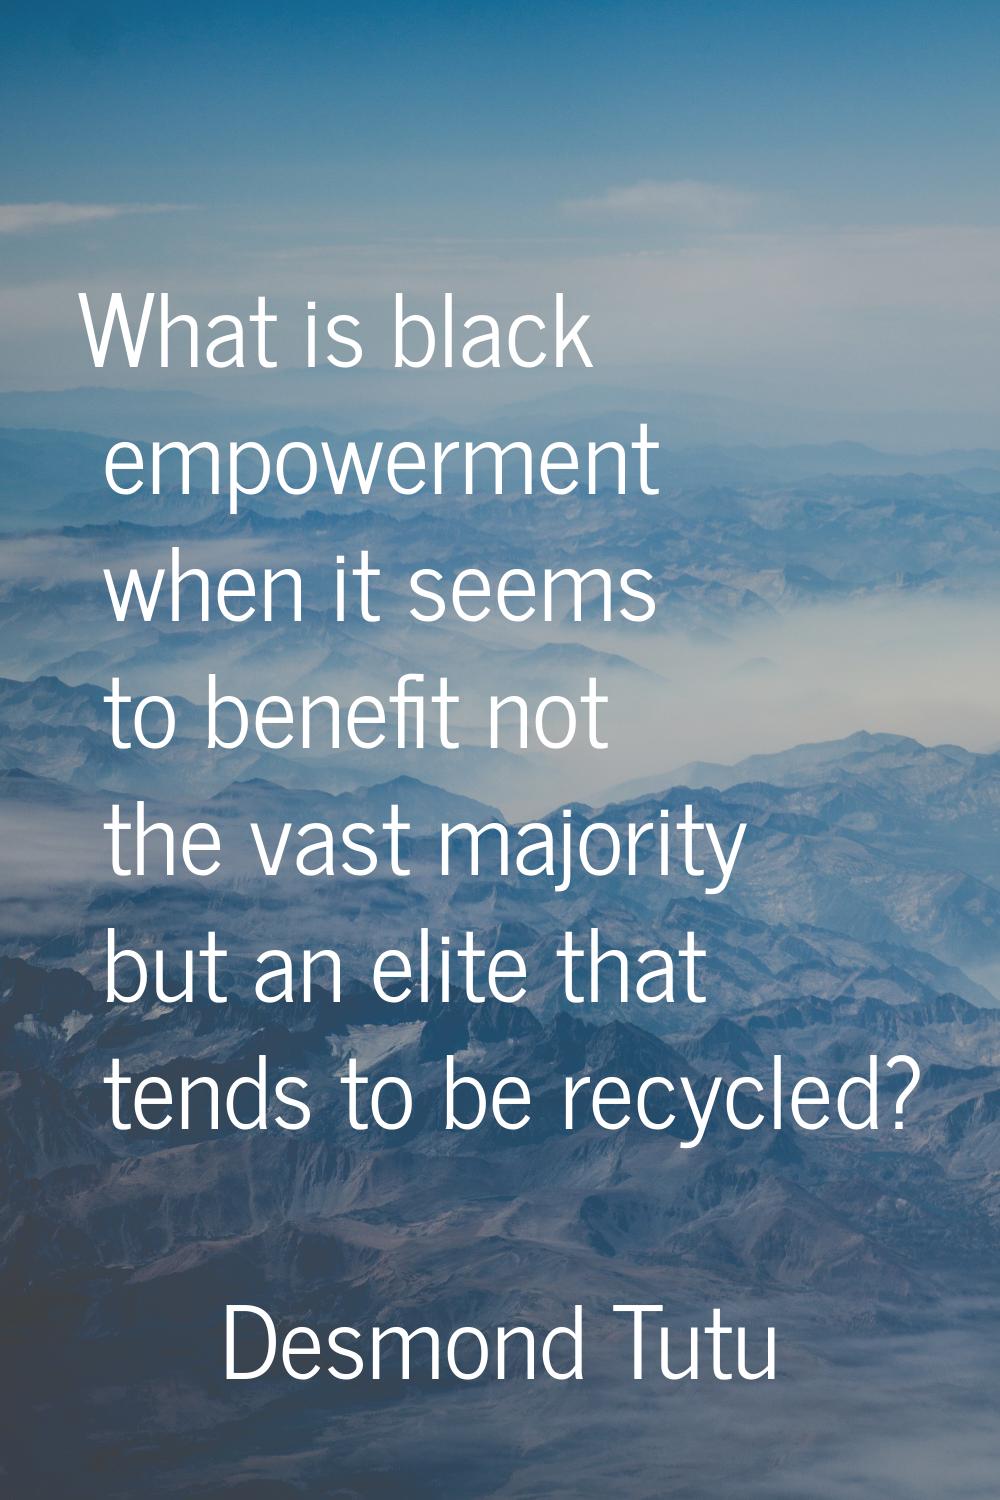 What is black empowerment when it seems to benefit not the vast majority but an elite that tends to